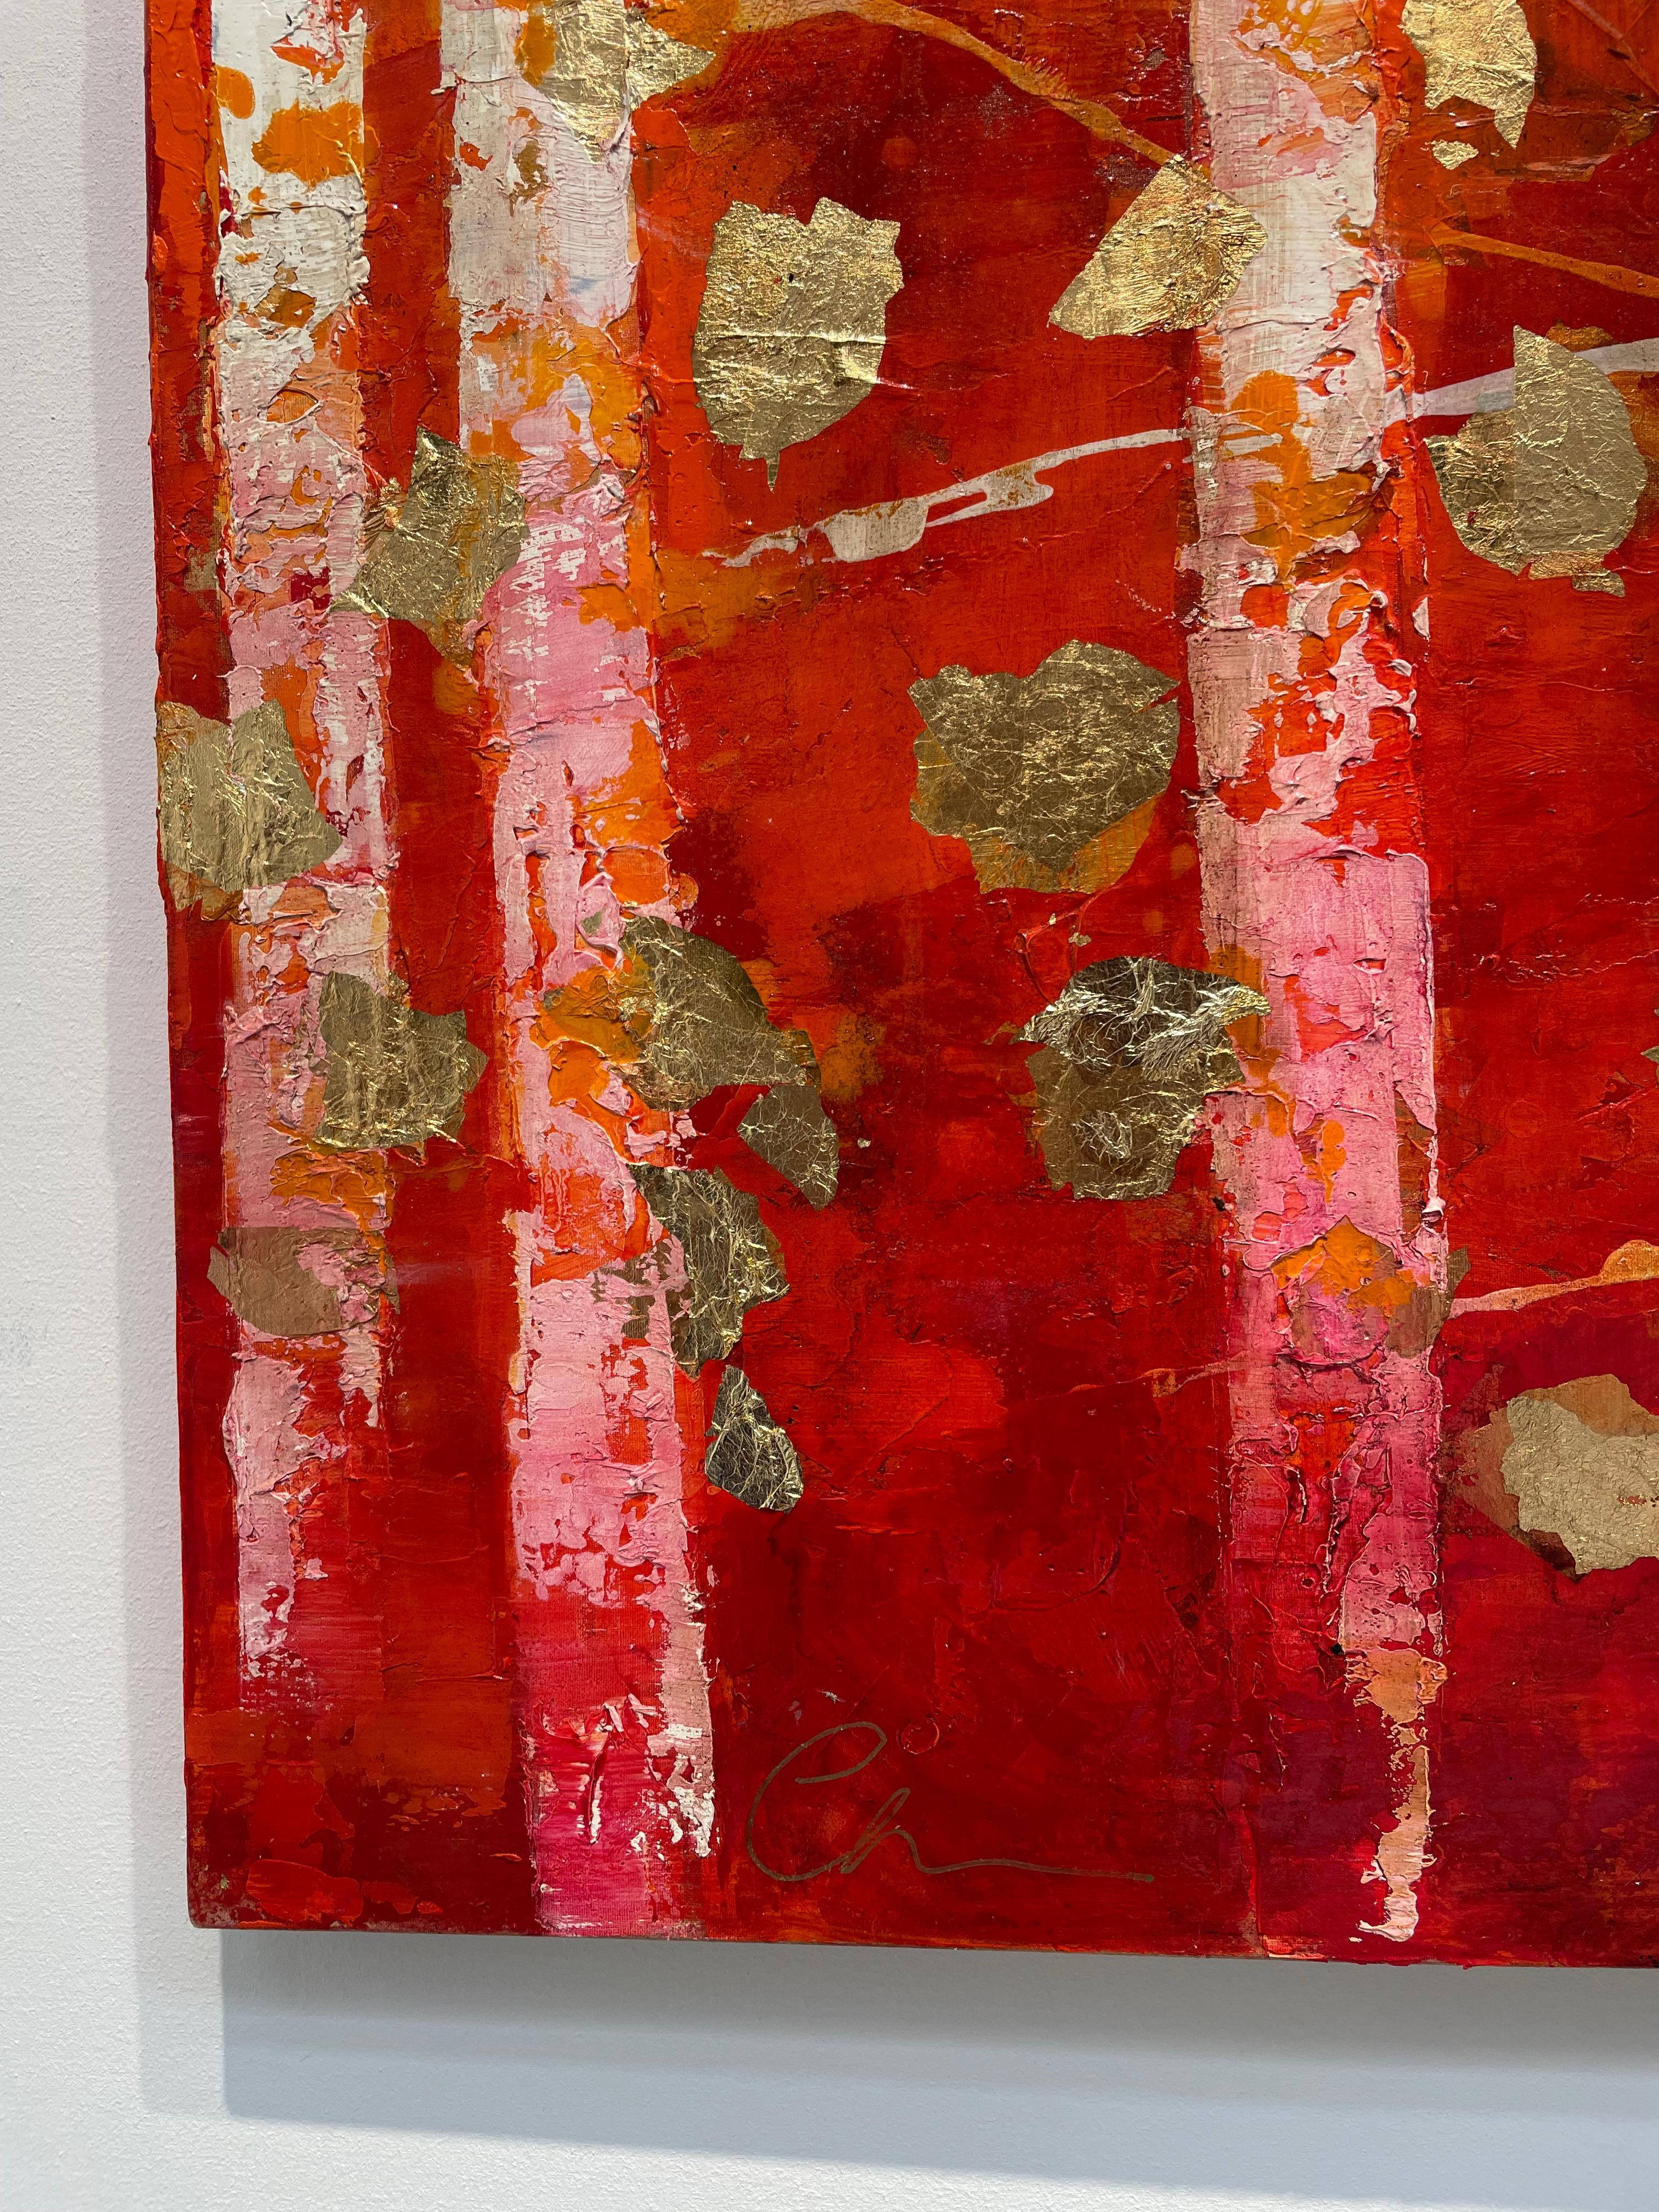 Summer Woods - 21st Cent., Oil, abstract, night, red, gold leaf - Painting by Chelsea Davine